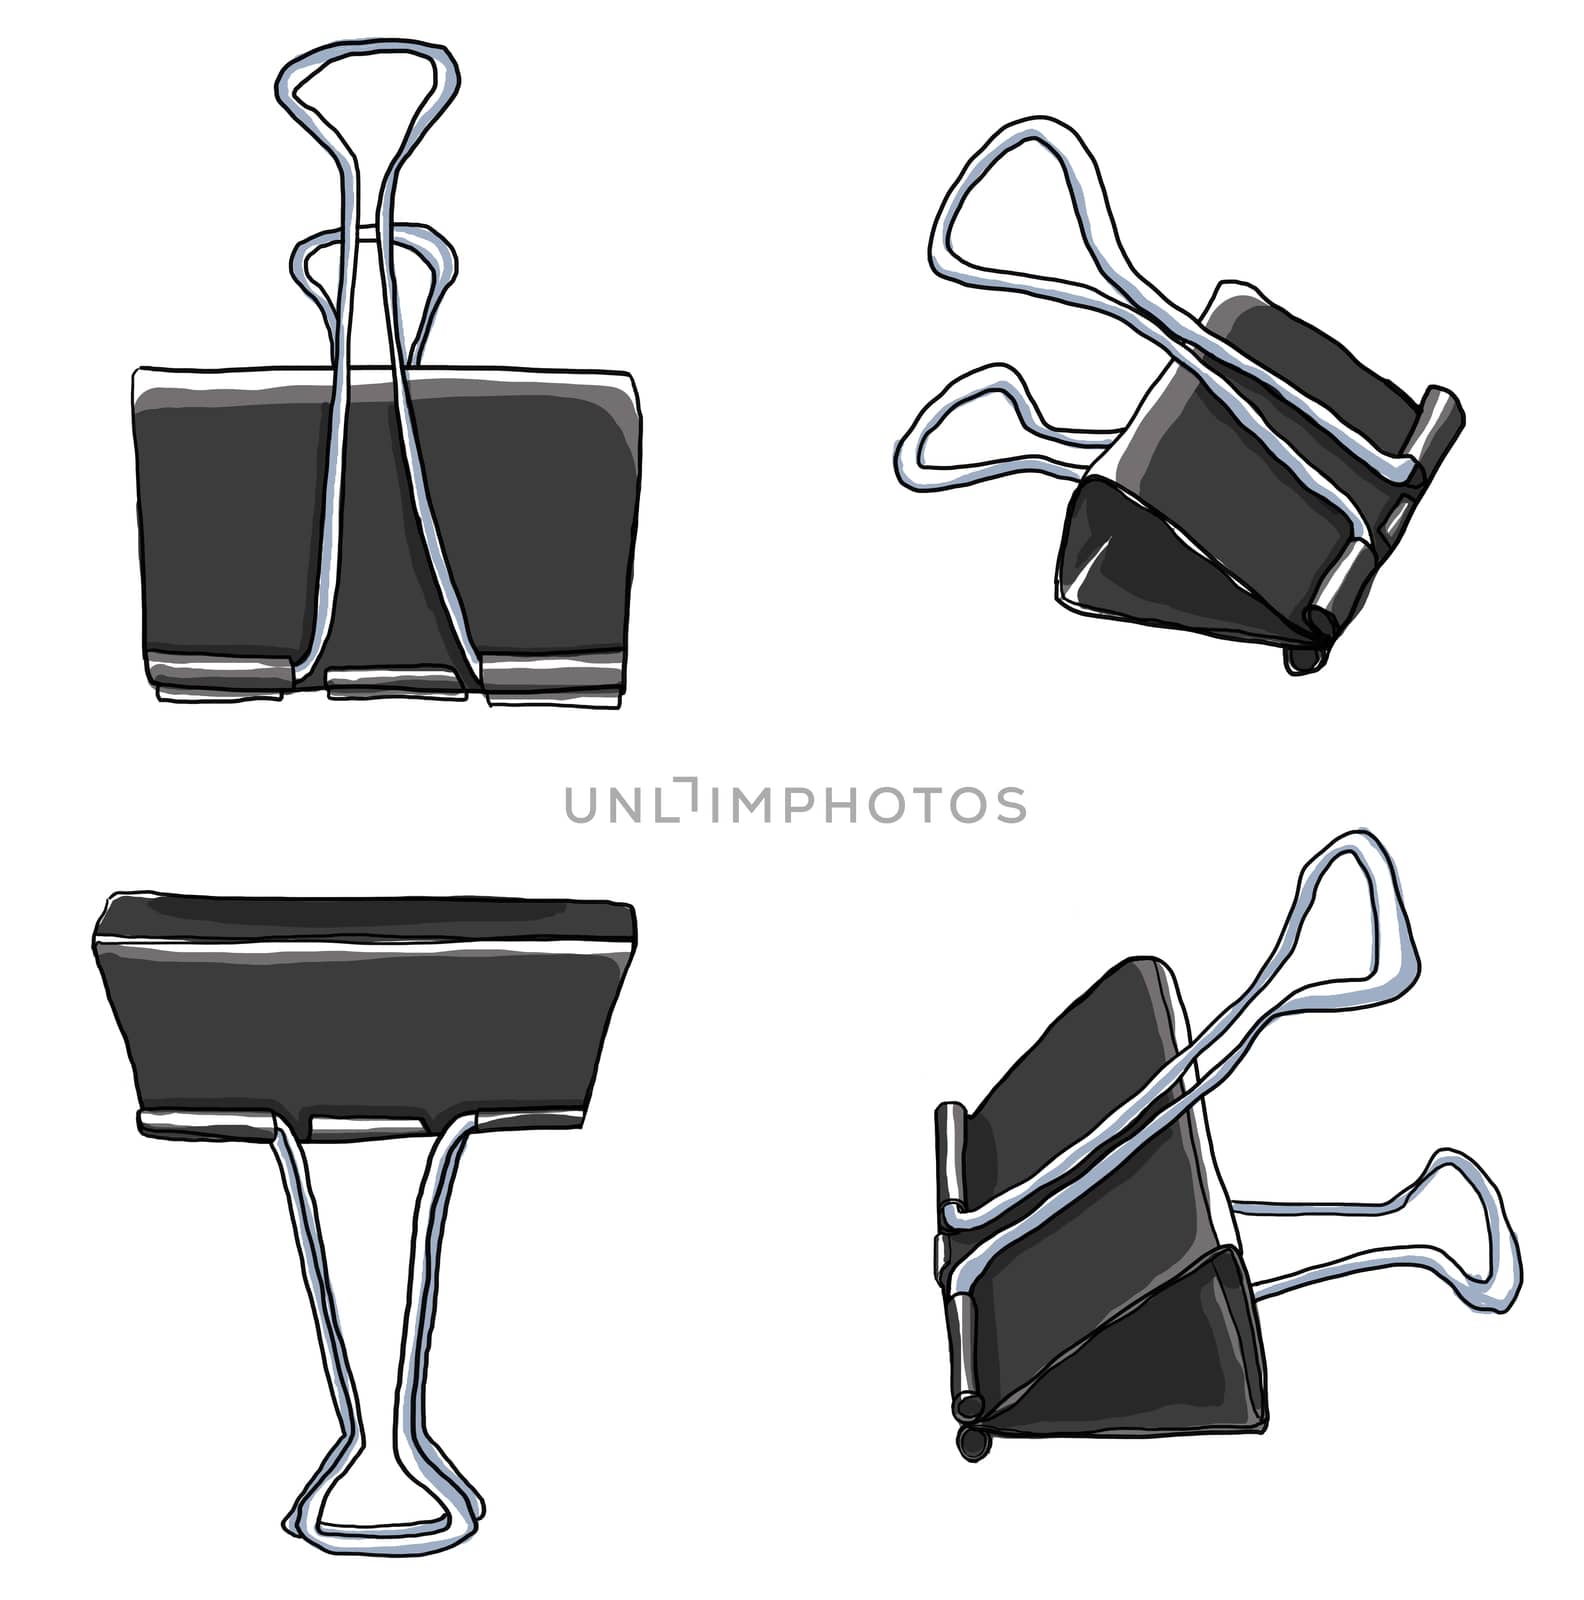 art Binder Clips Paper Clips Durable Office Paper File Organize  by paidaen